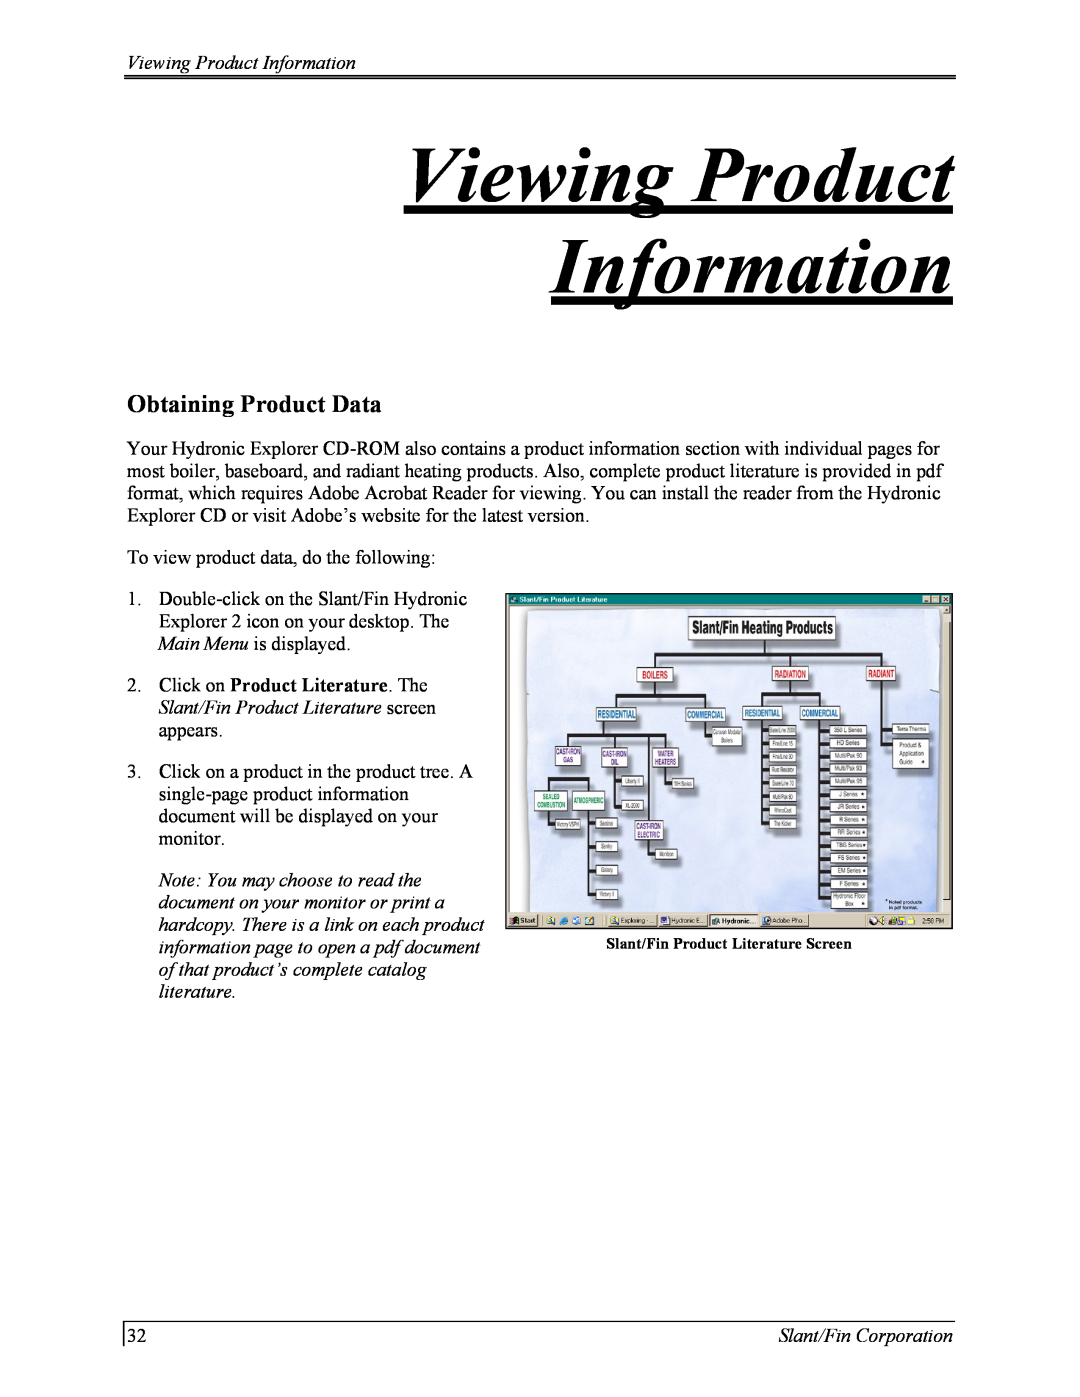 Slant/Fin Hydronic Explorer 2 Viewing Product Information, Obtaining Product Data, of that product’s complete catalog 